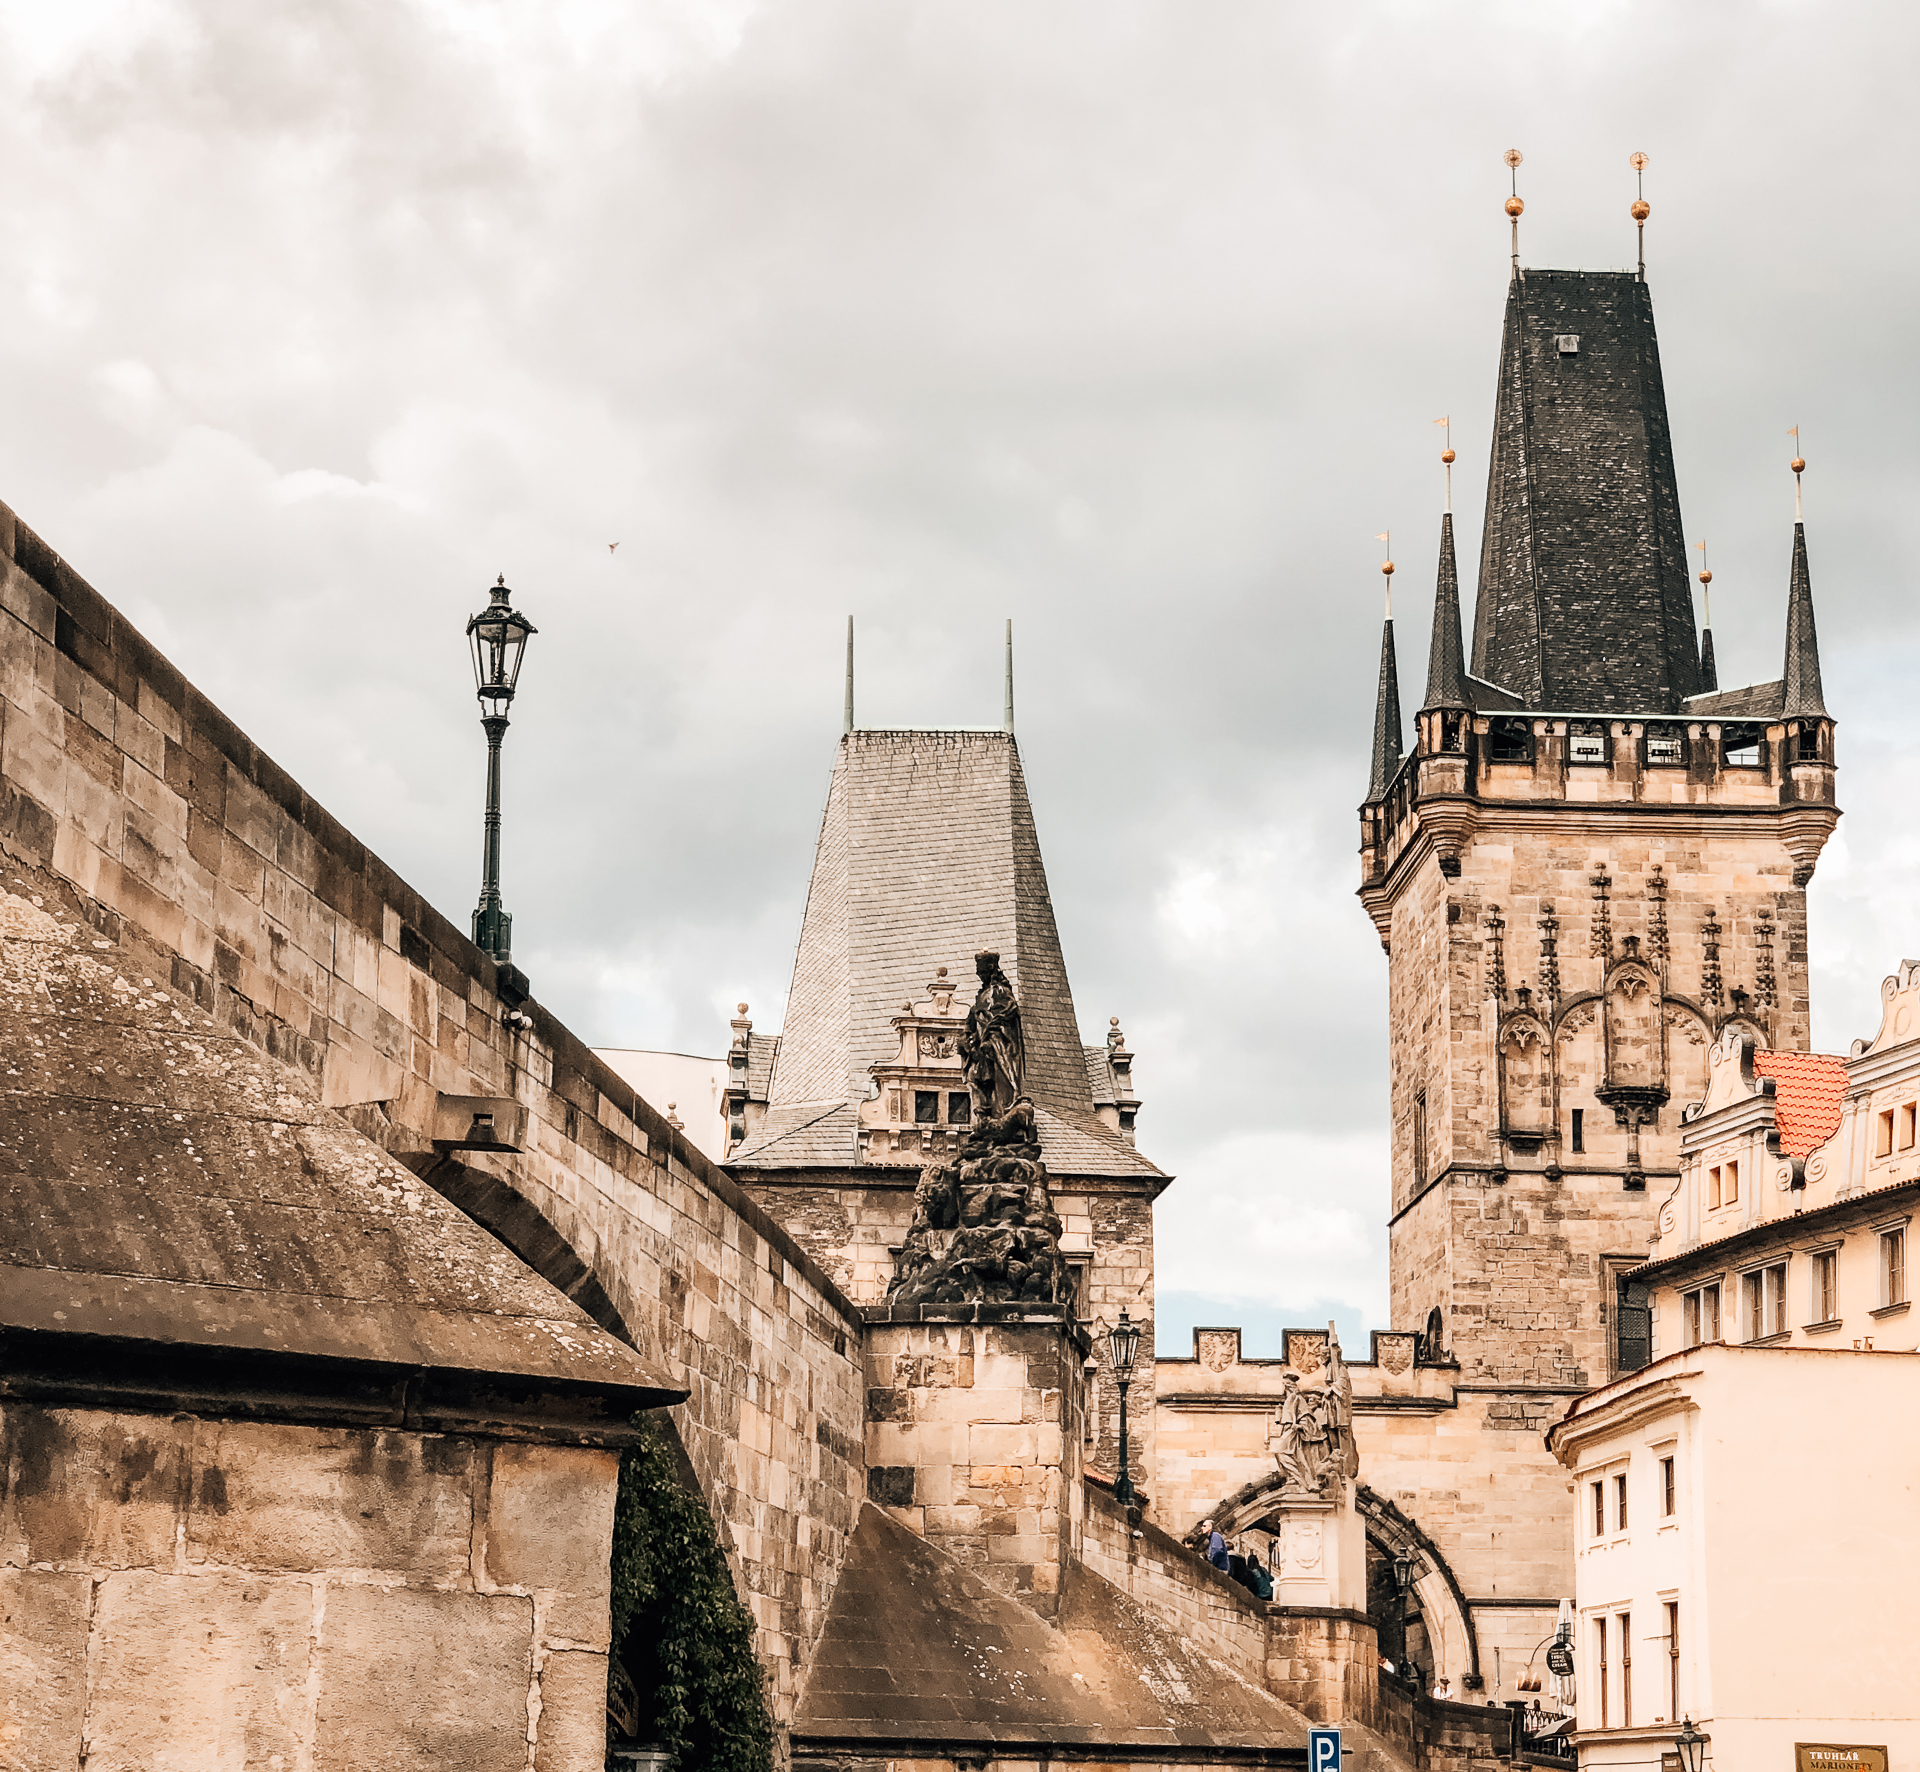 The Golden City: My Prague Itinerary featured by popular Boston travel blogger, Sunny Coastlines